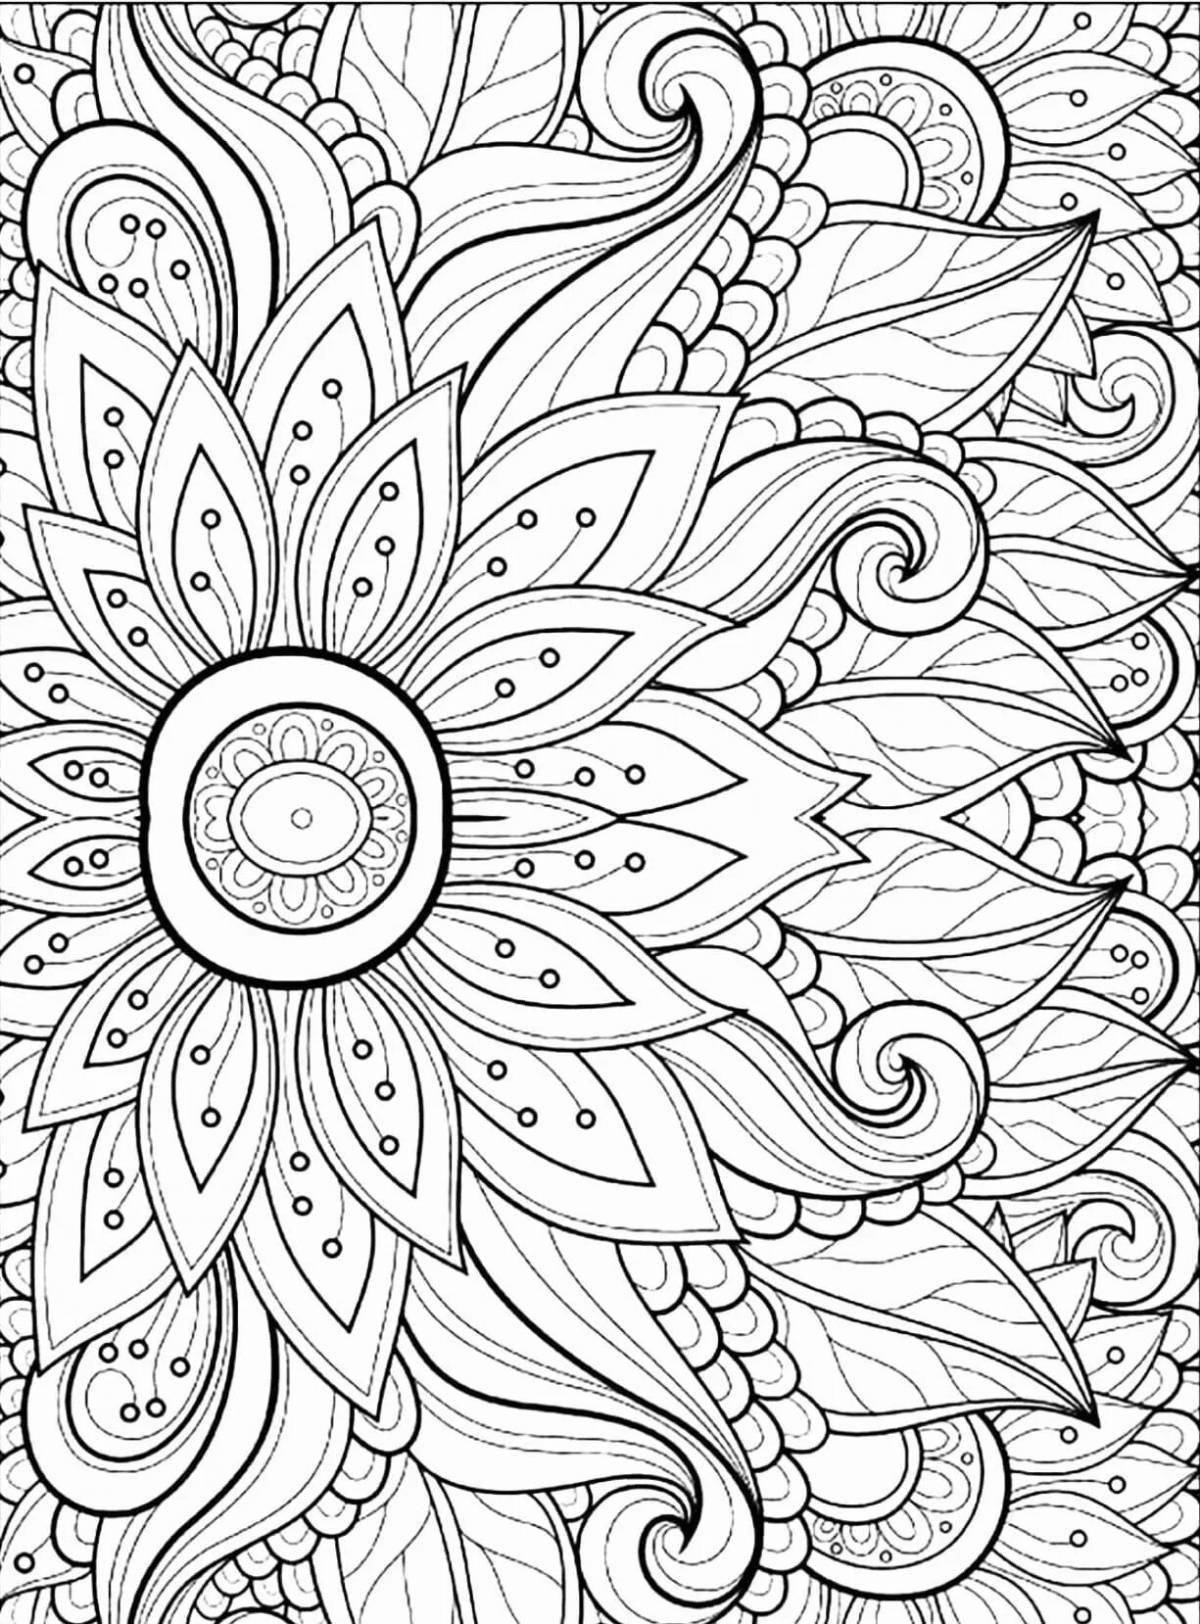 Intricate adult lung coloring page